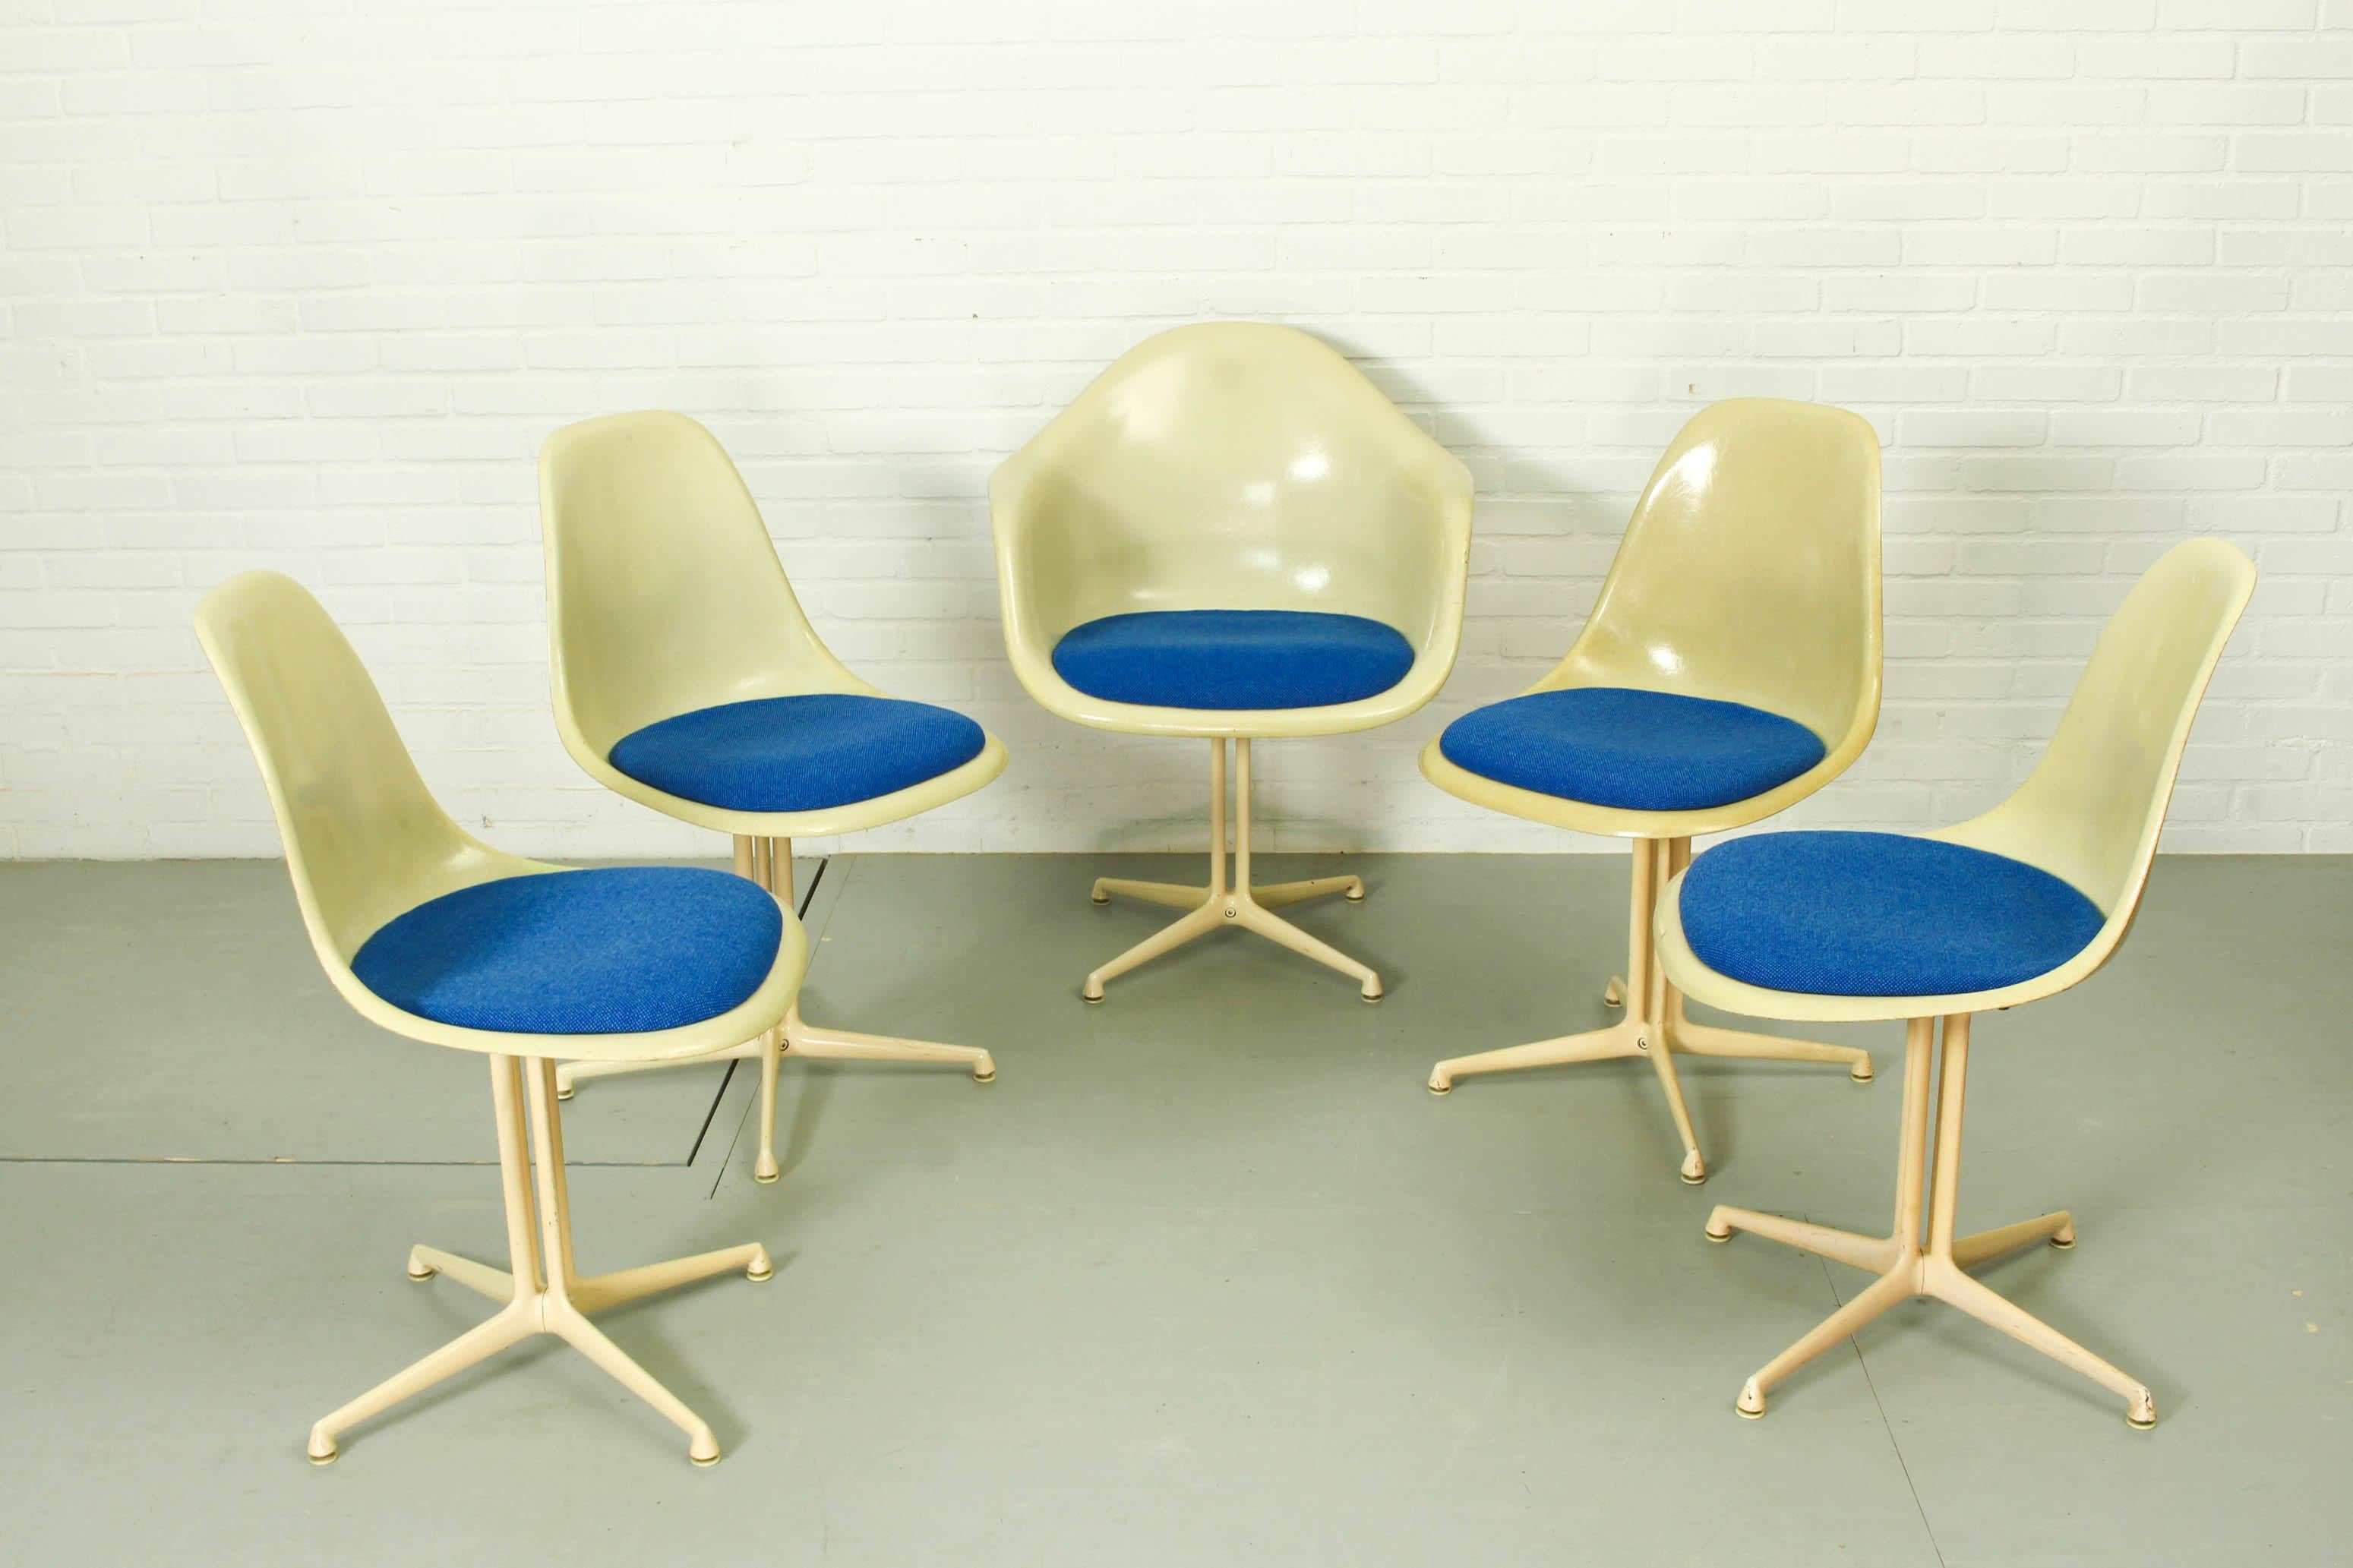 Set of 4 La Fonda fiberglass chairs and 1 La Fonda Fiberglass chair with armrests, designed by Charles and Ray Eames for Hermann Miller, 1961. The original cushions are reupholstered with Kvadrat Hallingdal in similar color as original fabric. One